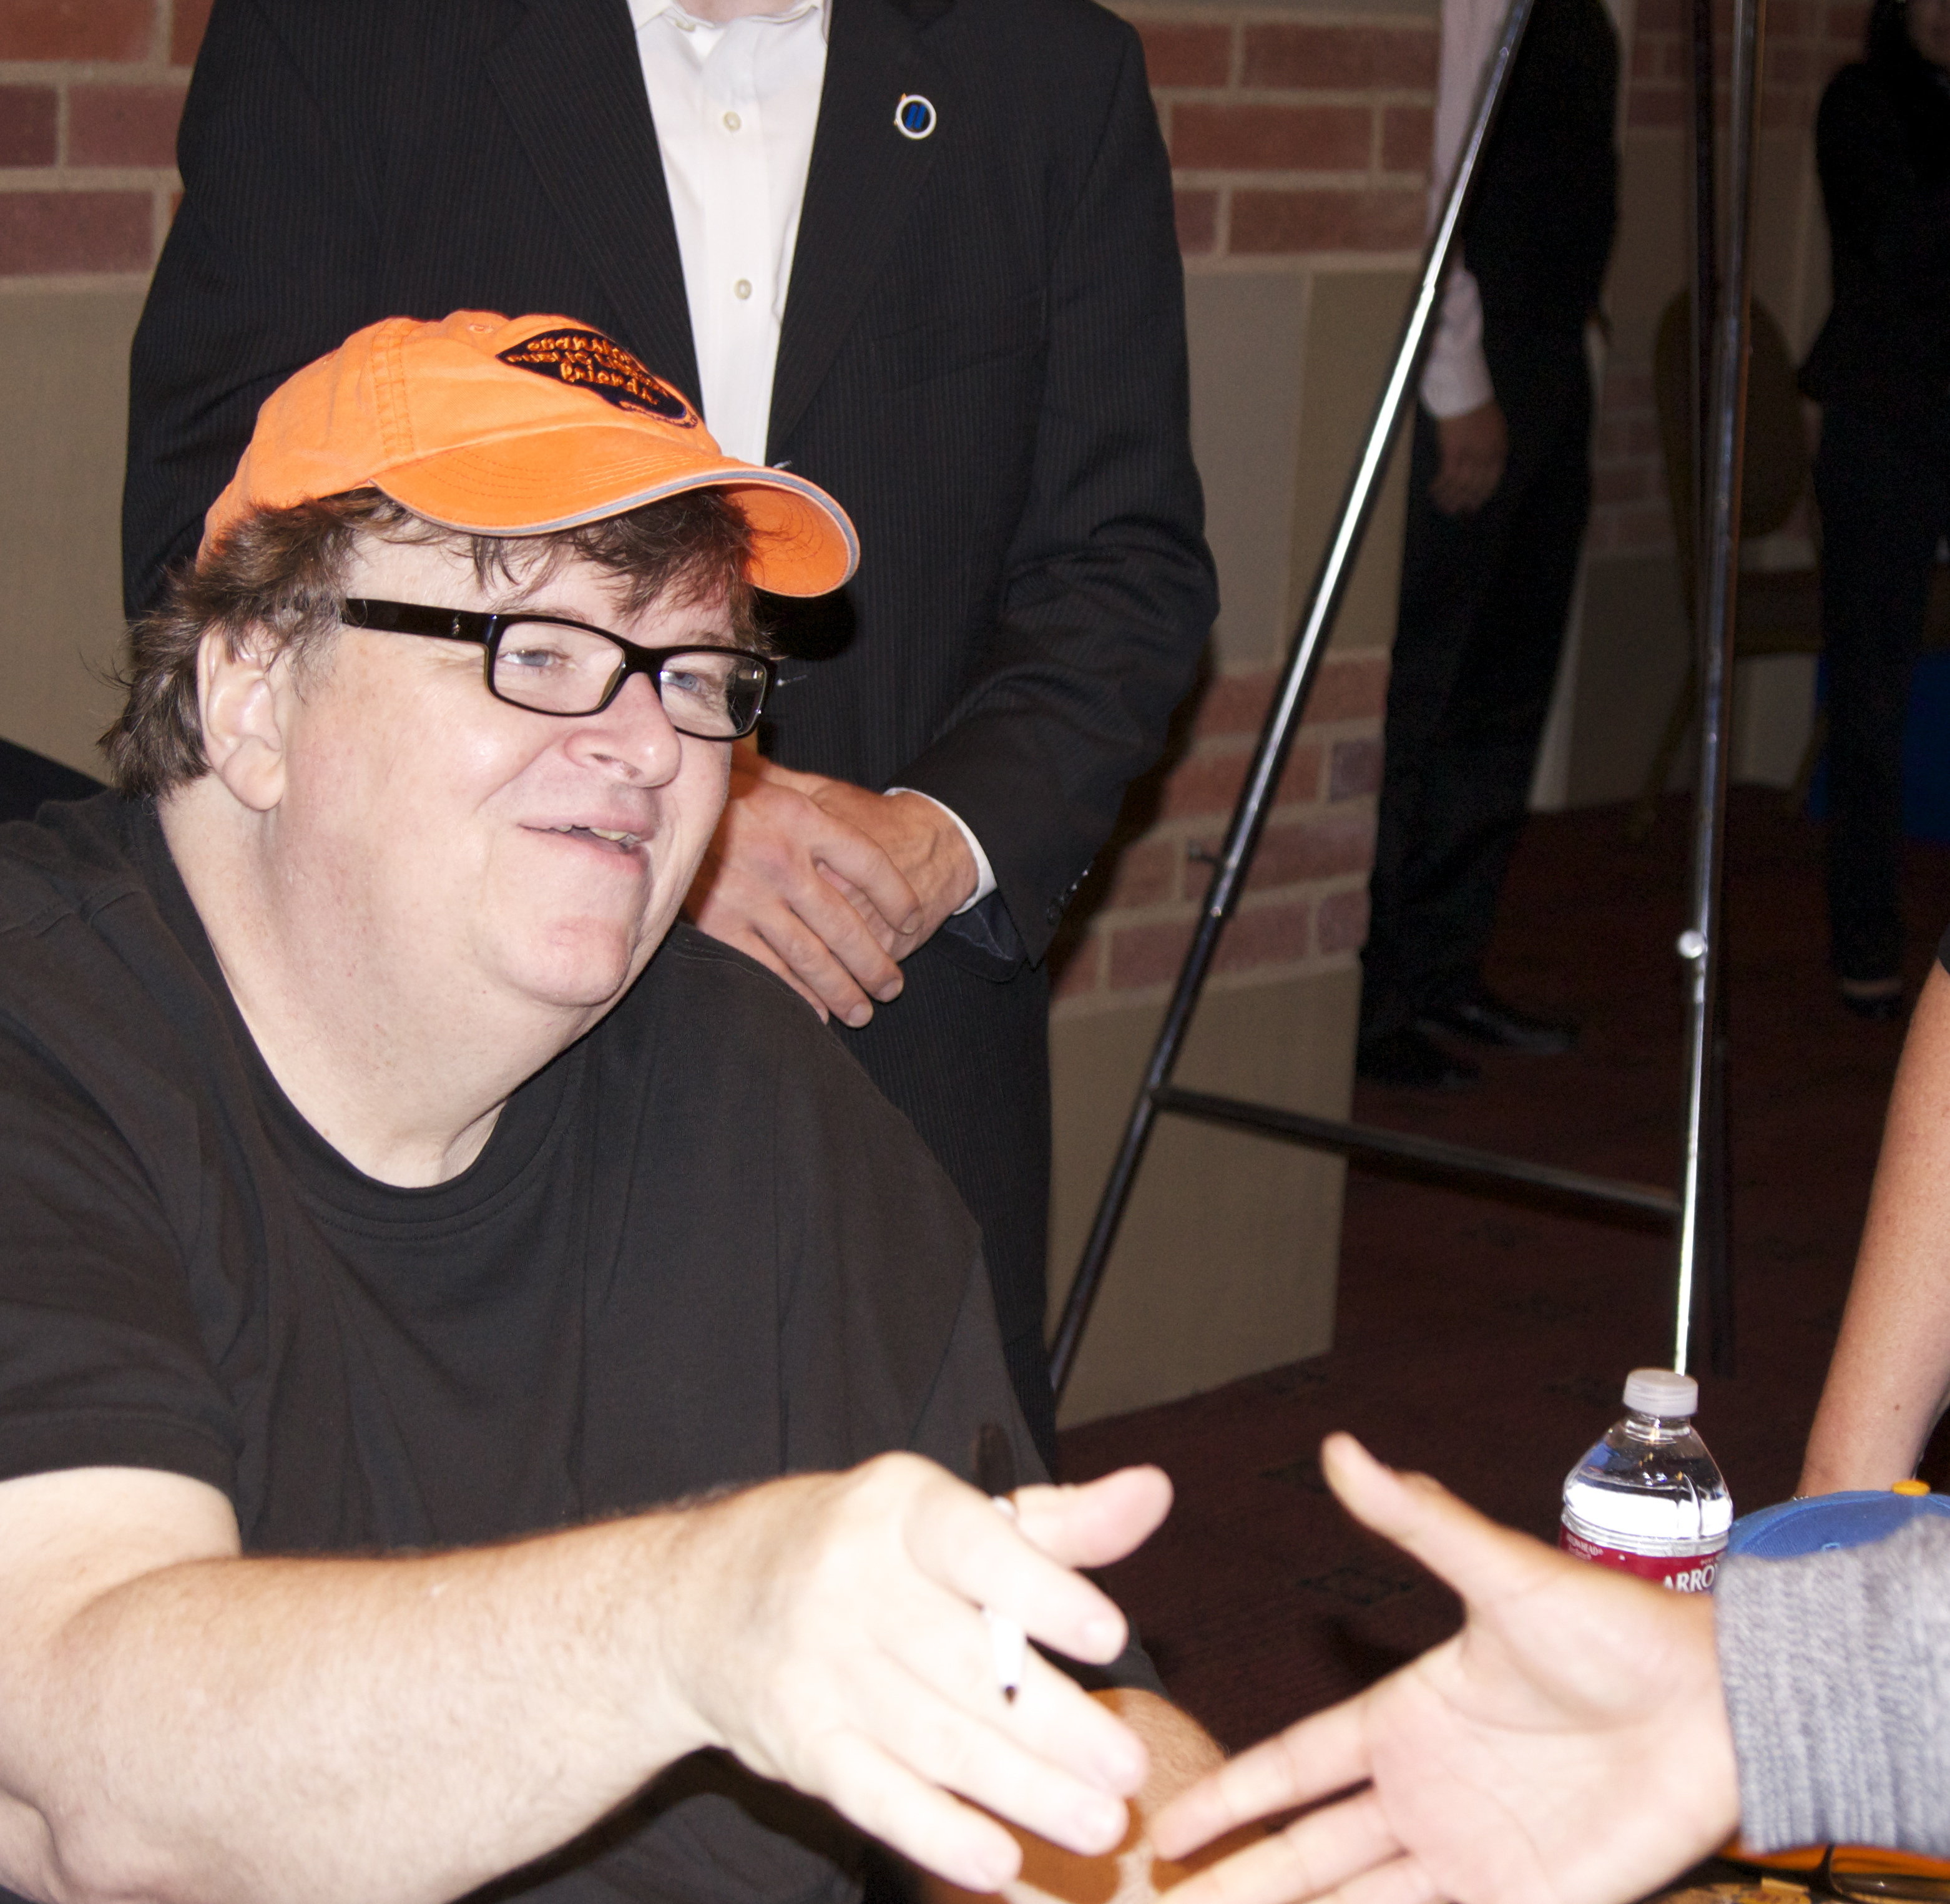 Oscar Academy Awards Winner Michael Moore (left) and Fright Night Film Festival Corman Award Winner Ryota Nakanishi (right) after the successful screening of this film for the UCLA graduate ceremony and Michael Moore's lecture at UCLA.